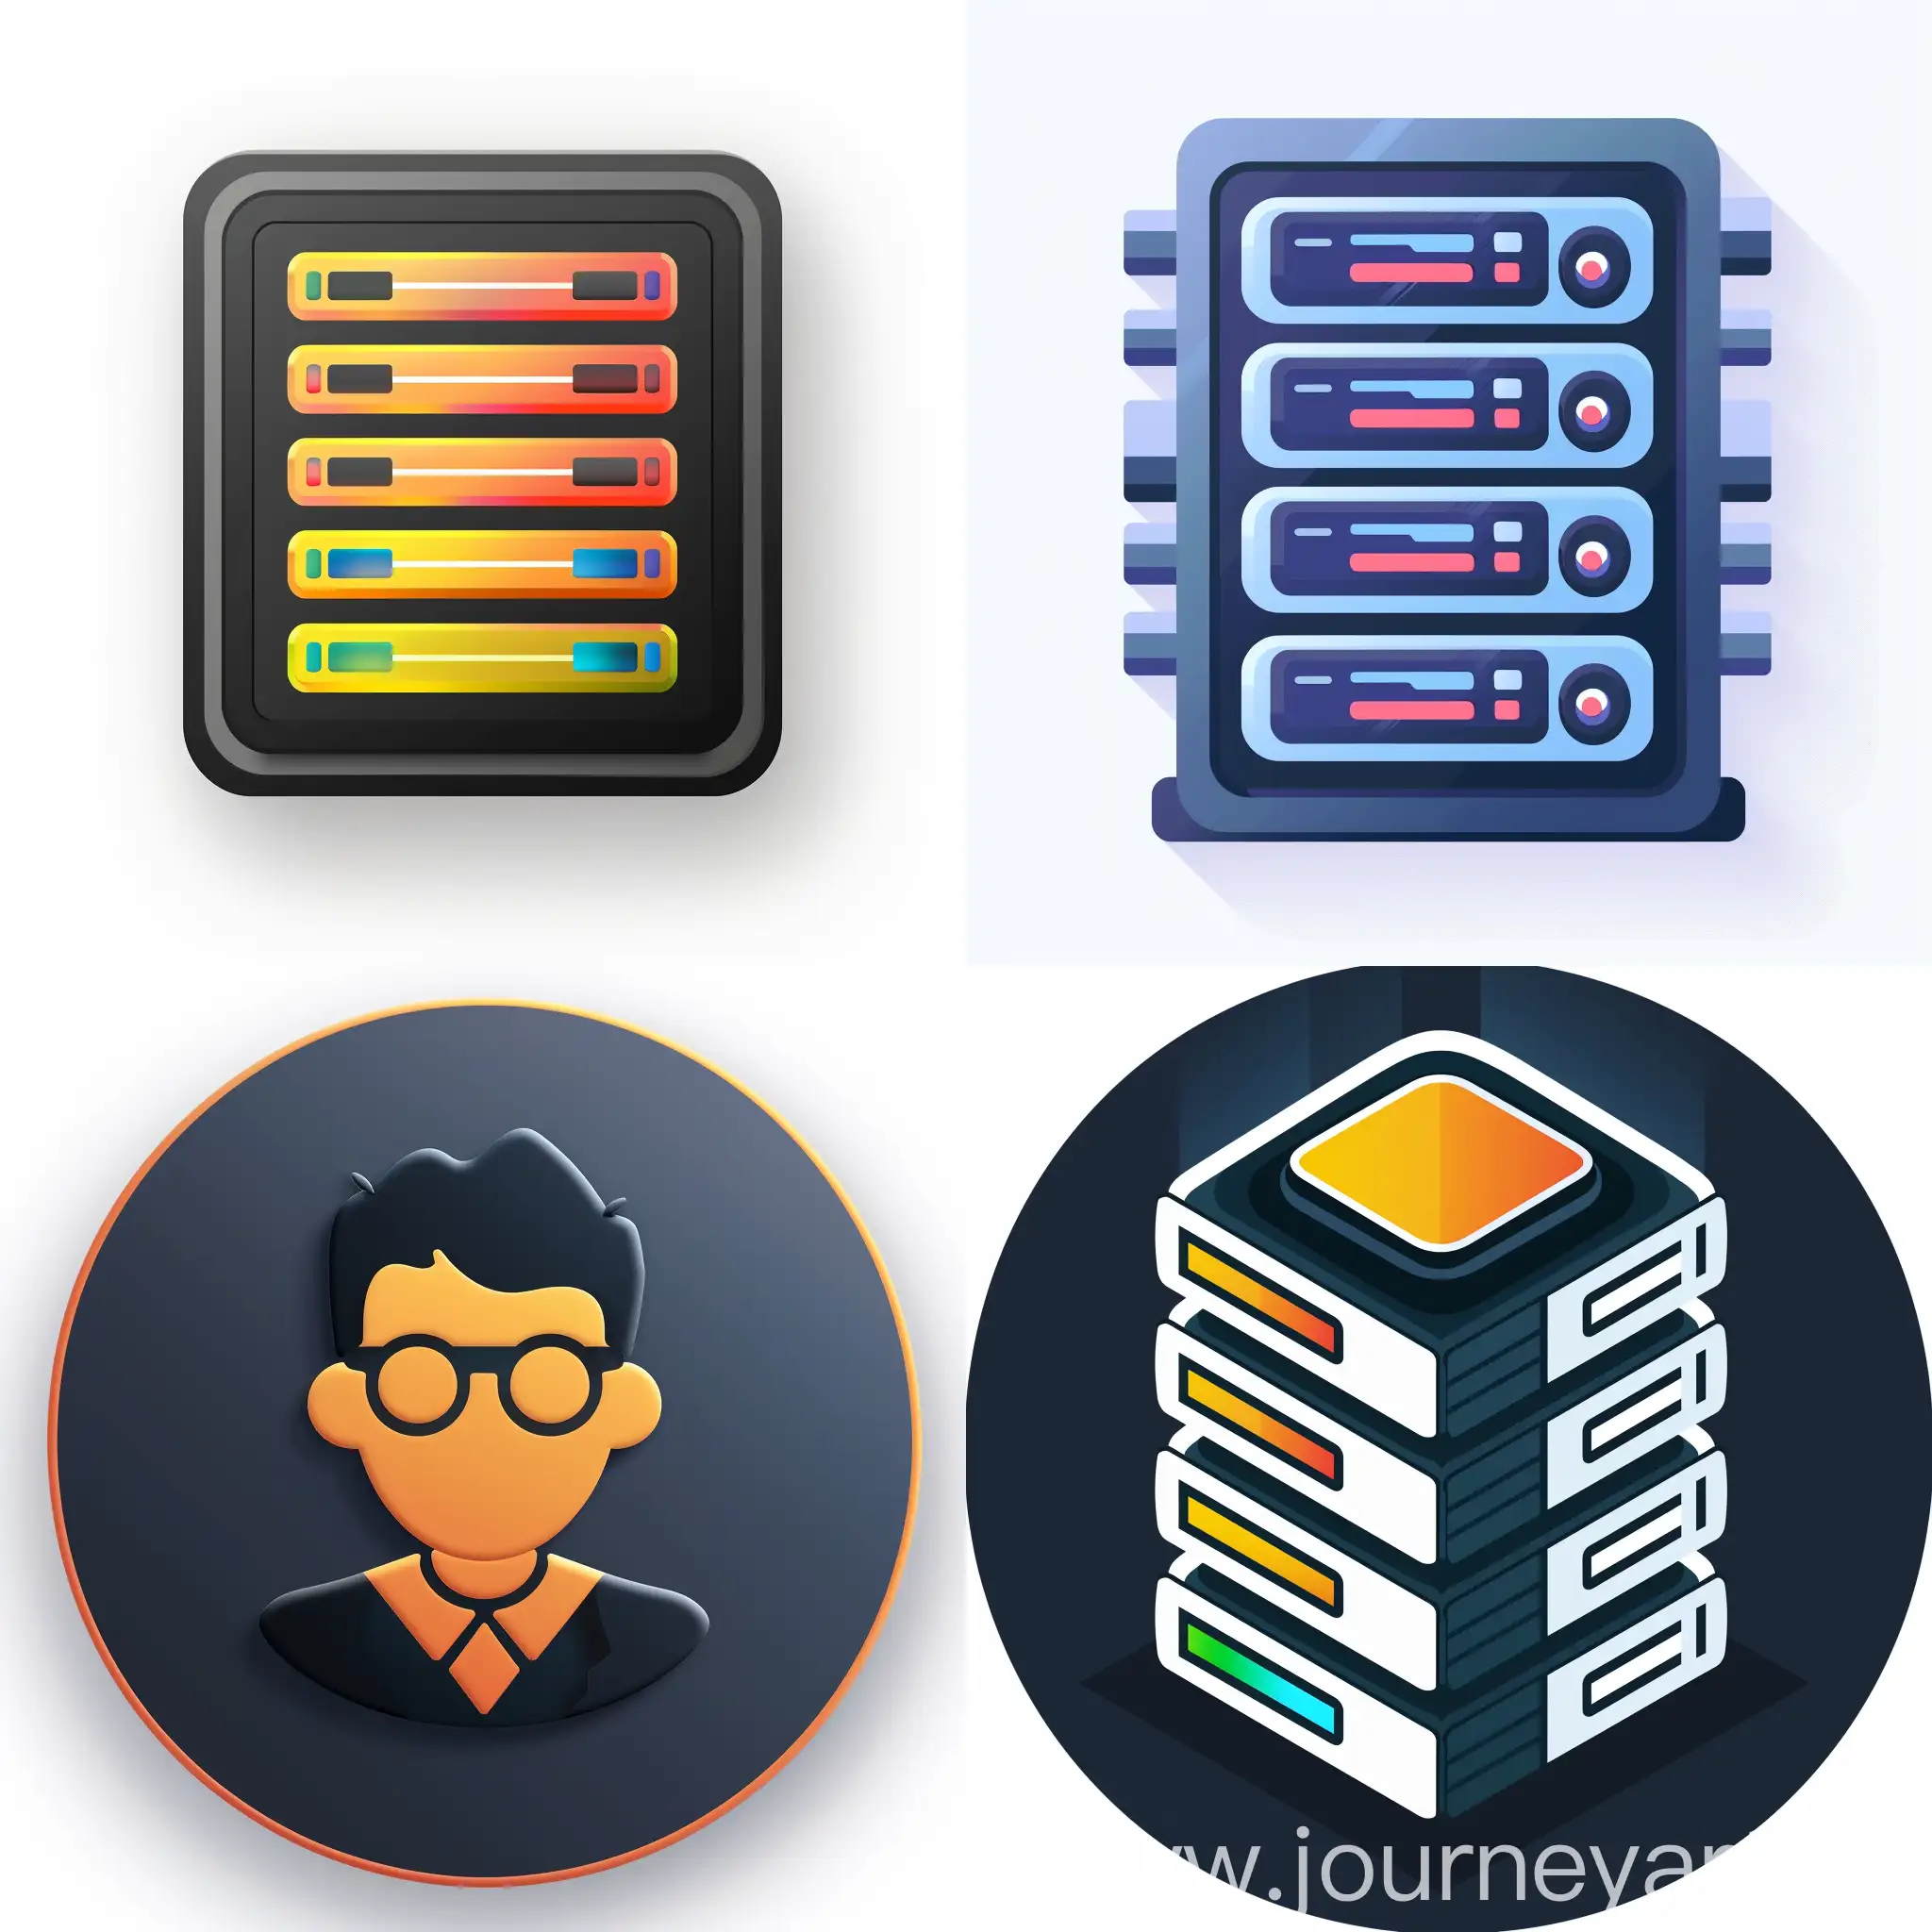 system administrator icon